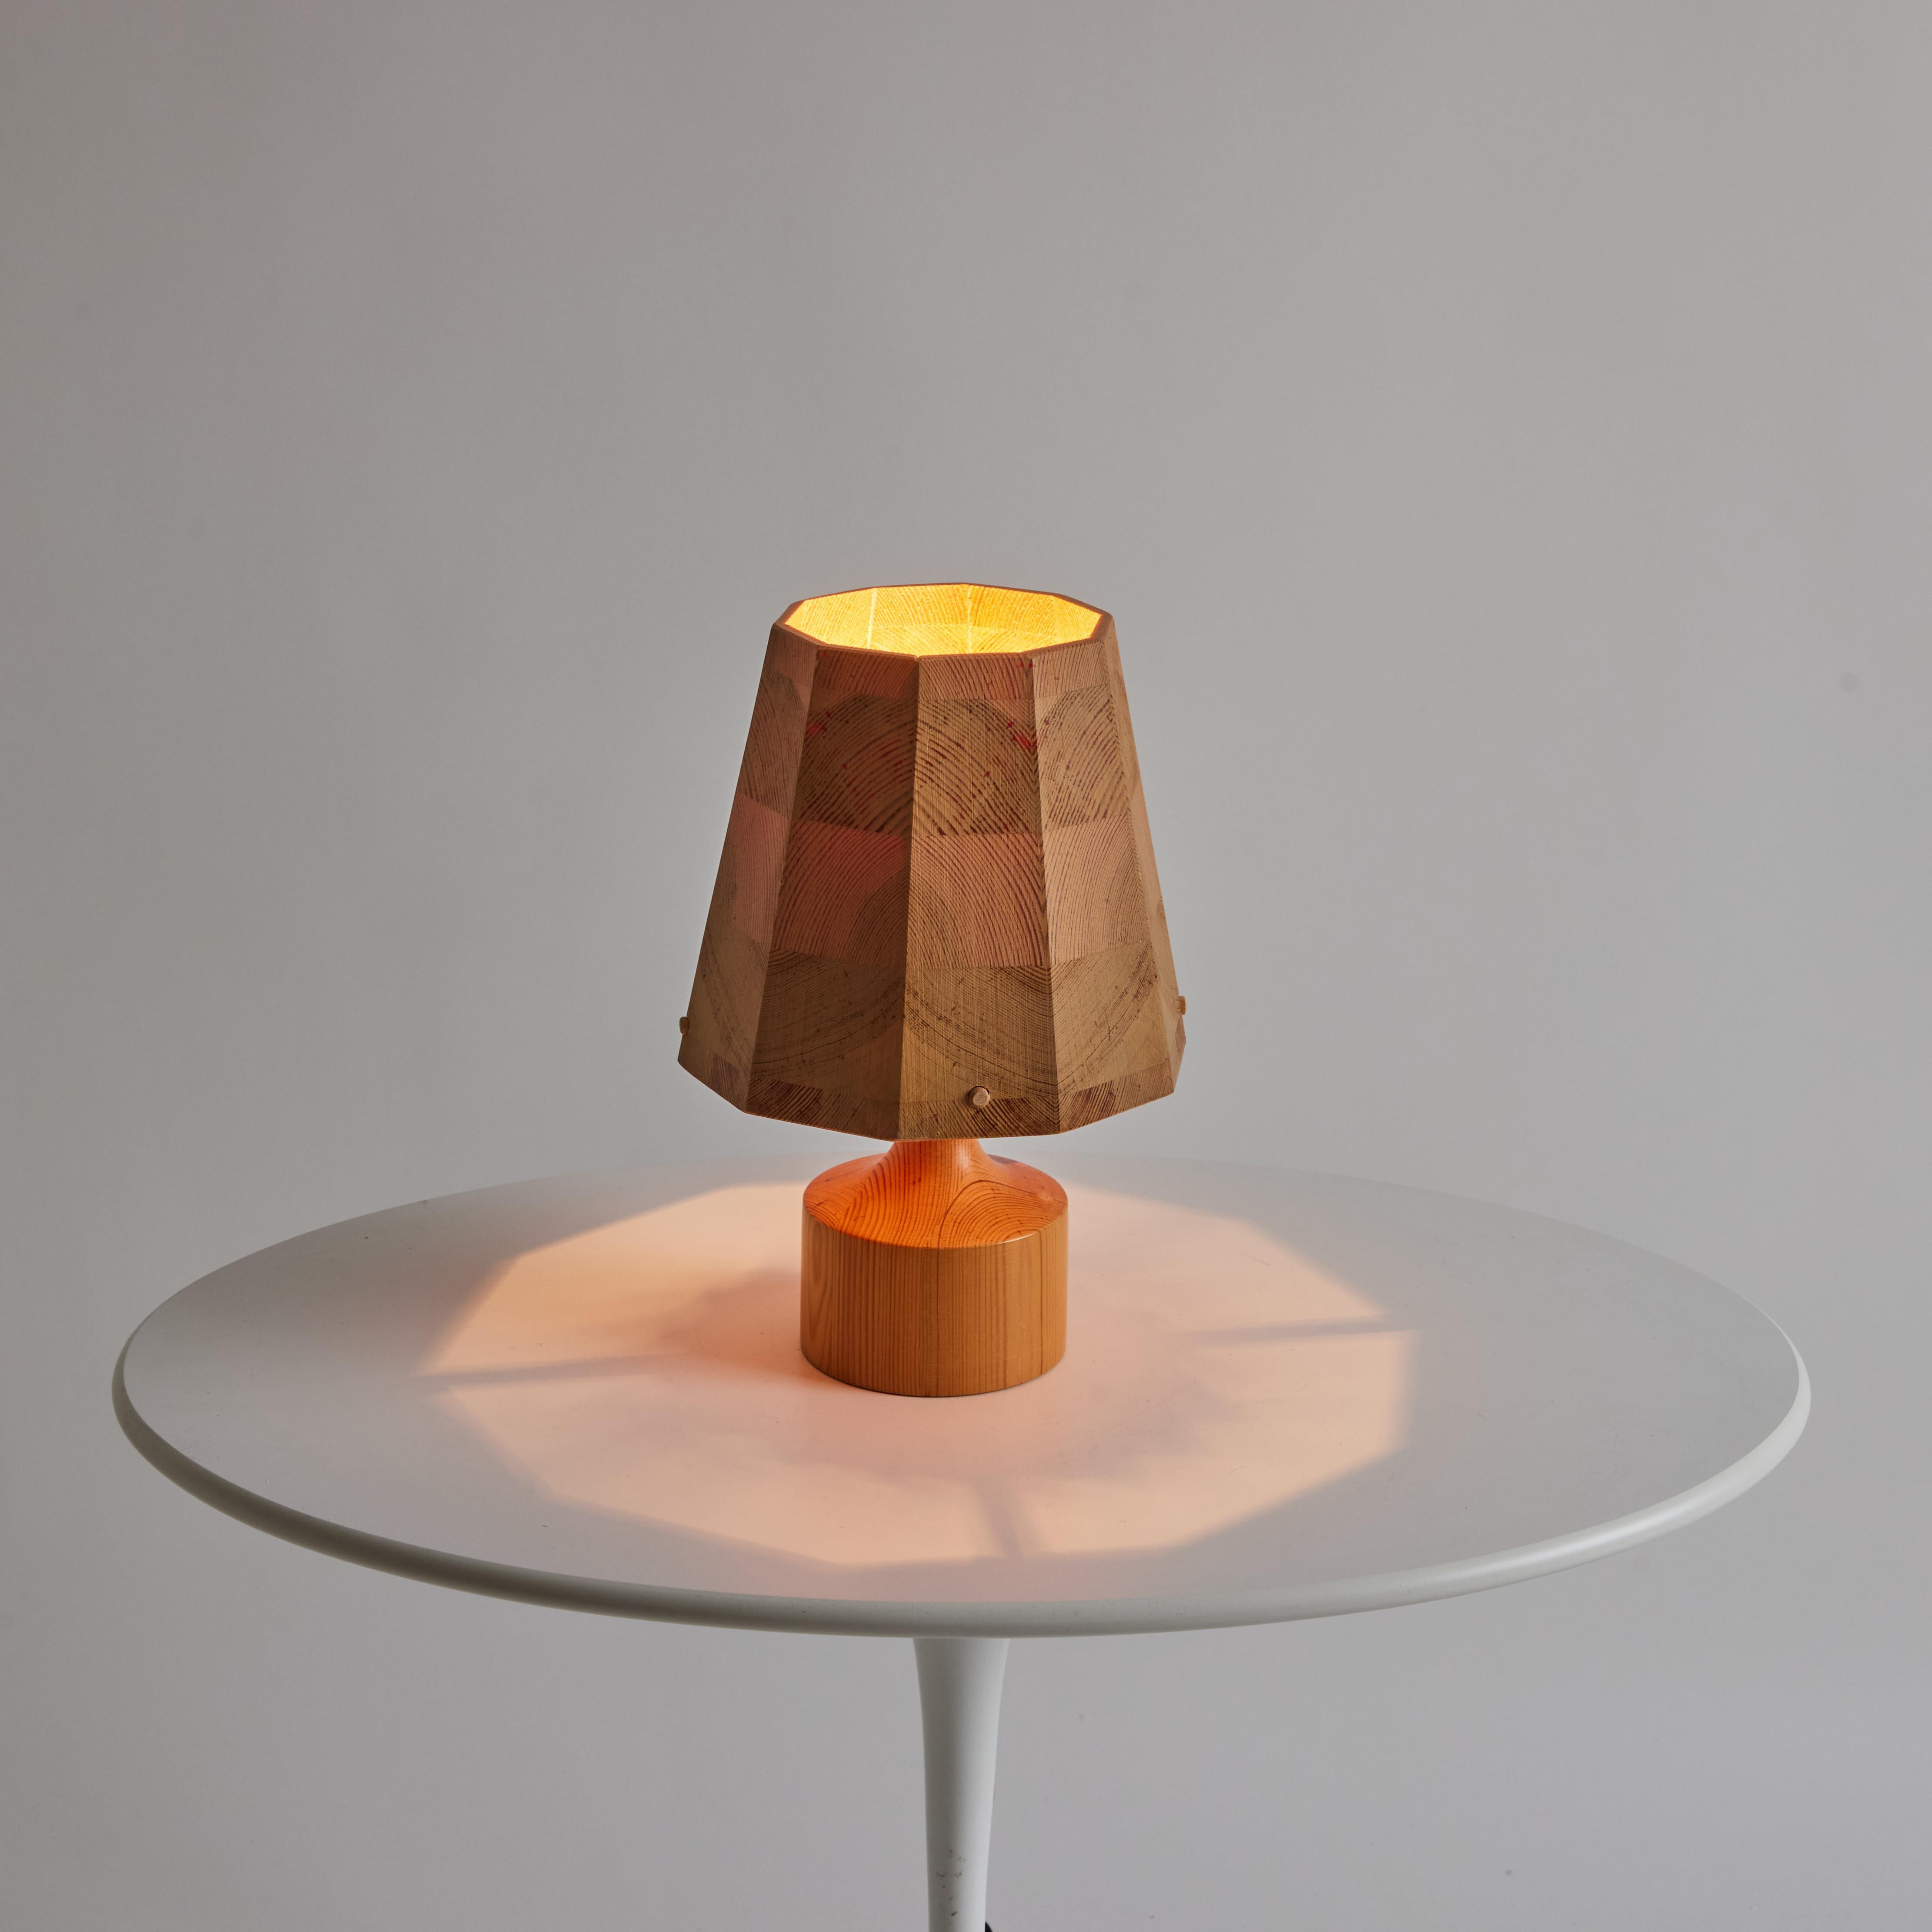 Pair of 1960s Wood Table Lamps Attributed to Hans-Agne Jakobsson for AB Ellysett For Sale 3